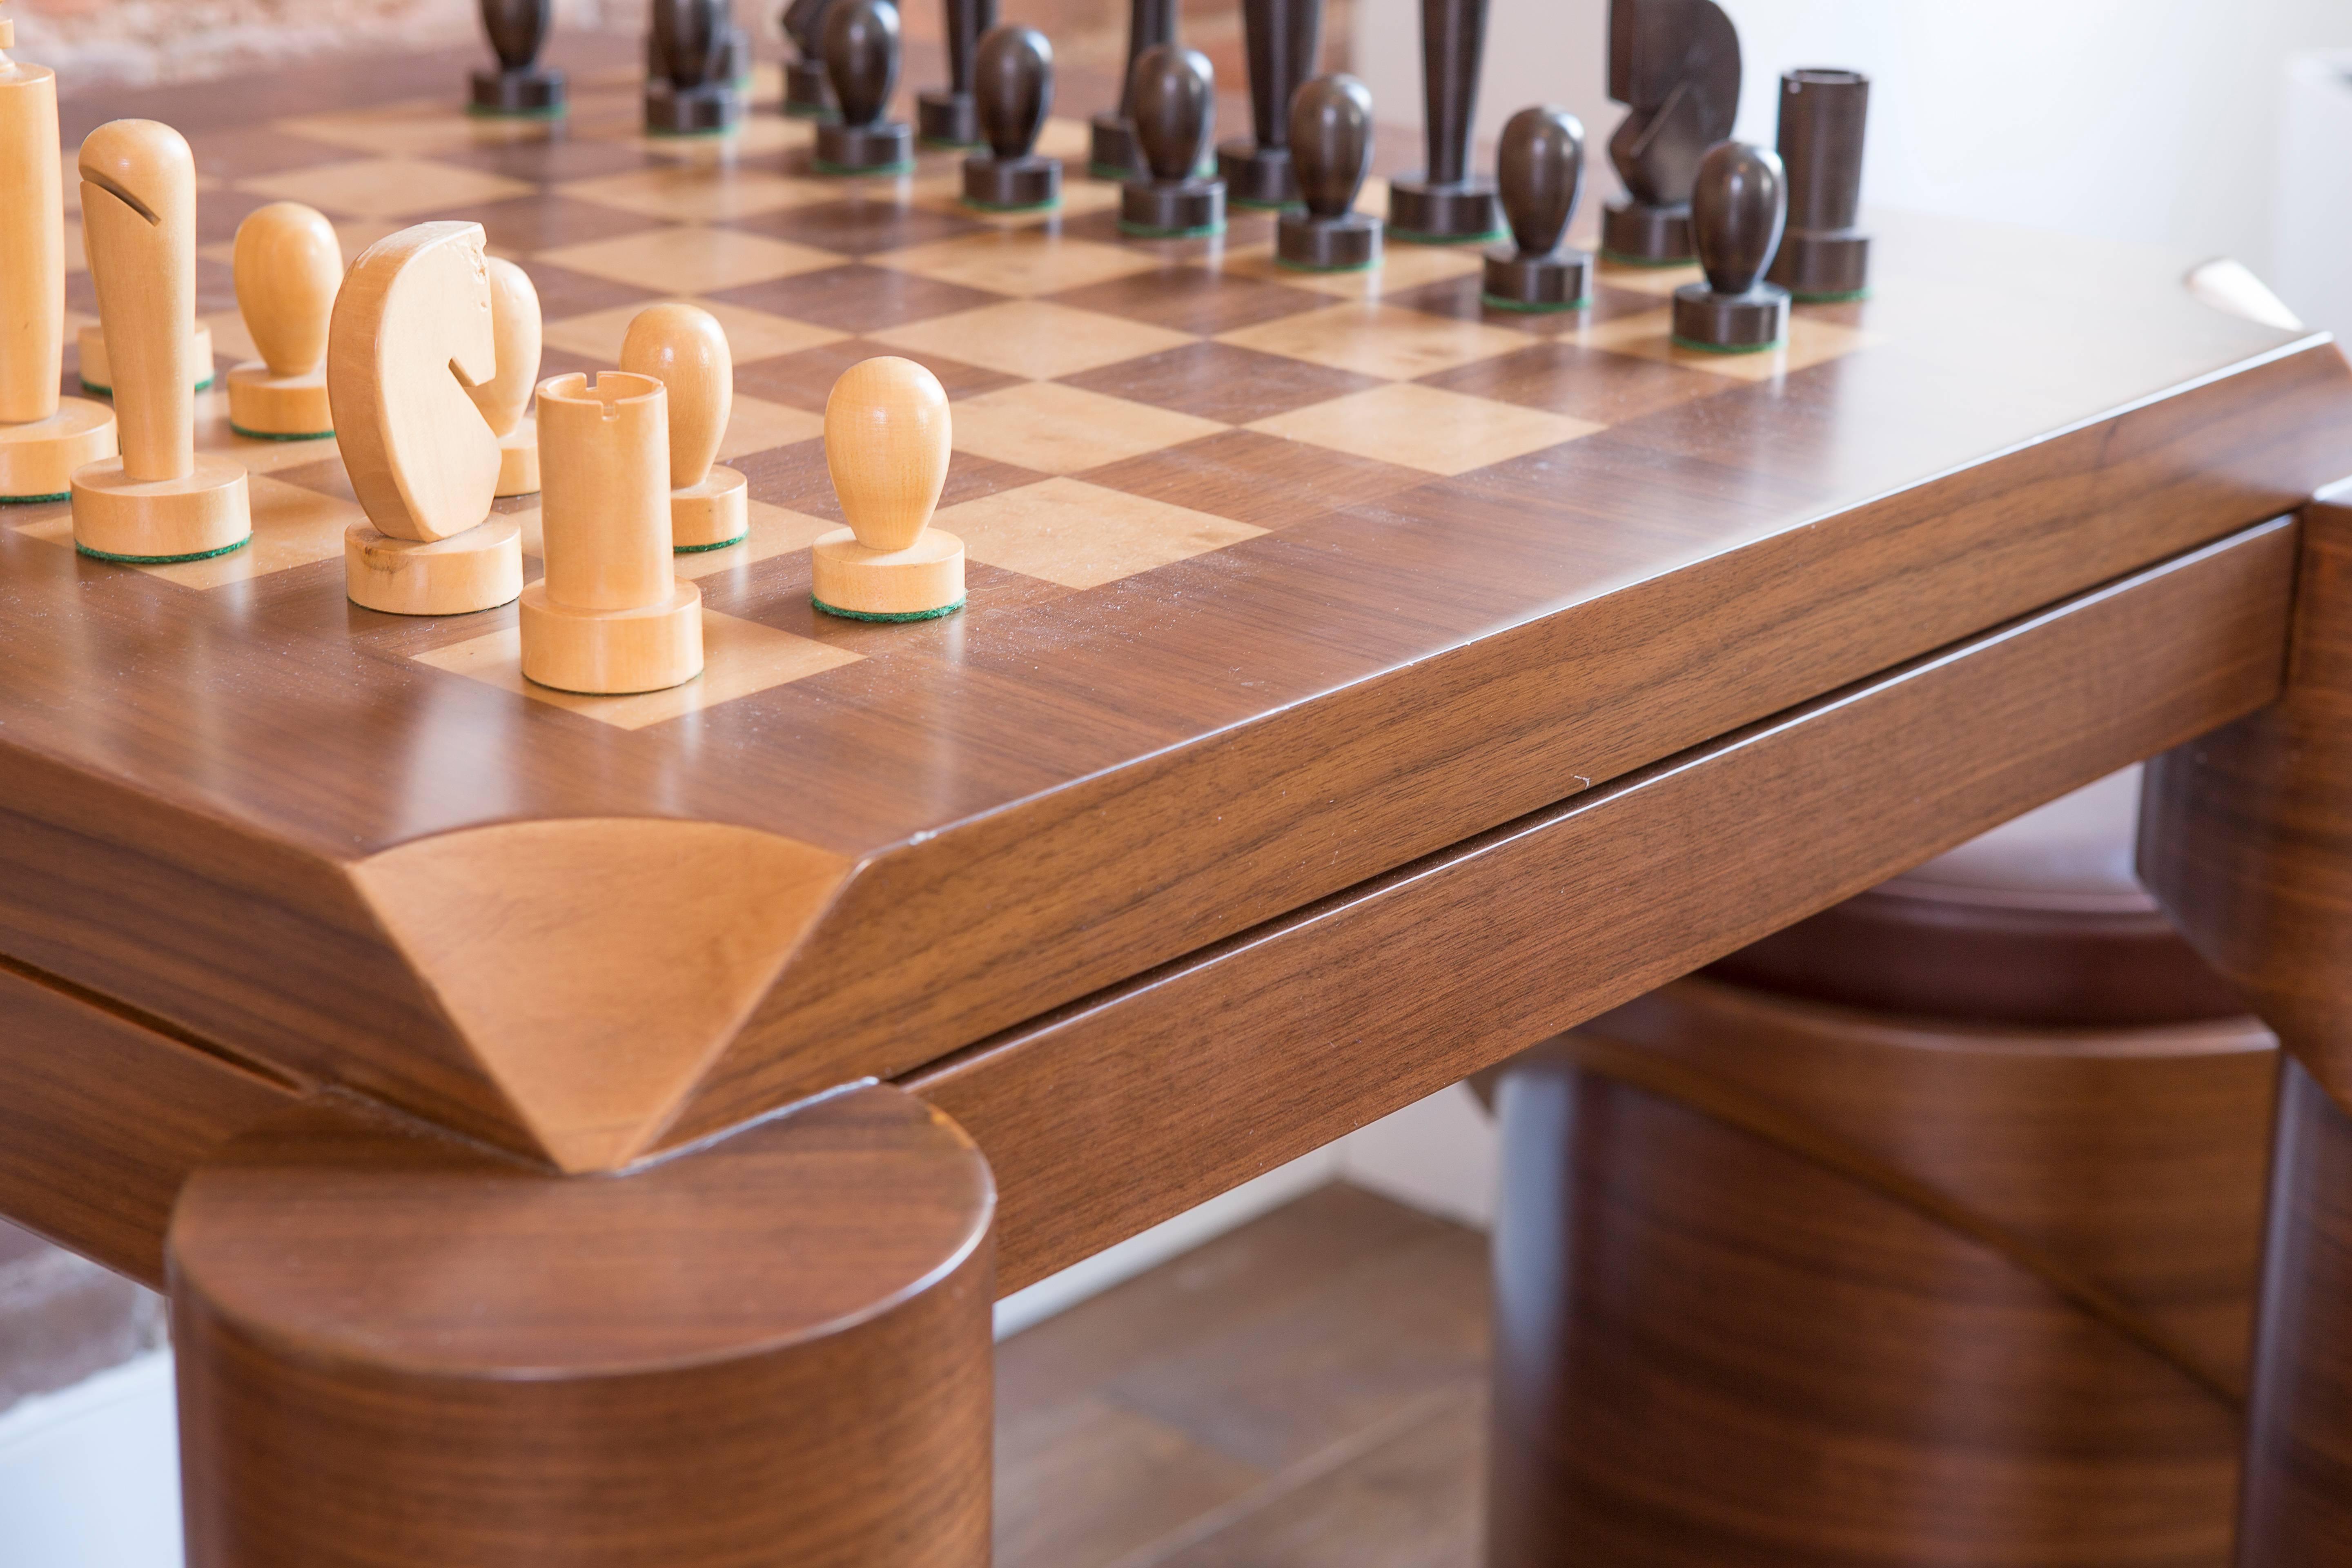 The ancient game of chess is based on strategy and winning is ultimately being the better strategist. The table was designed to reflect this exchange between opponents. The players think long-term, protect certain pieces, while losing other pieces